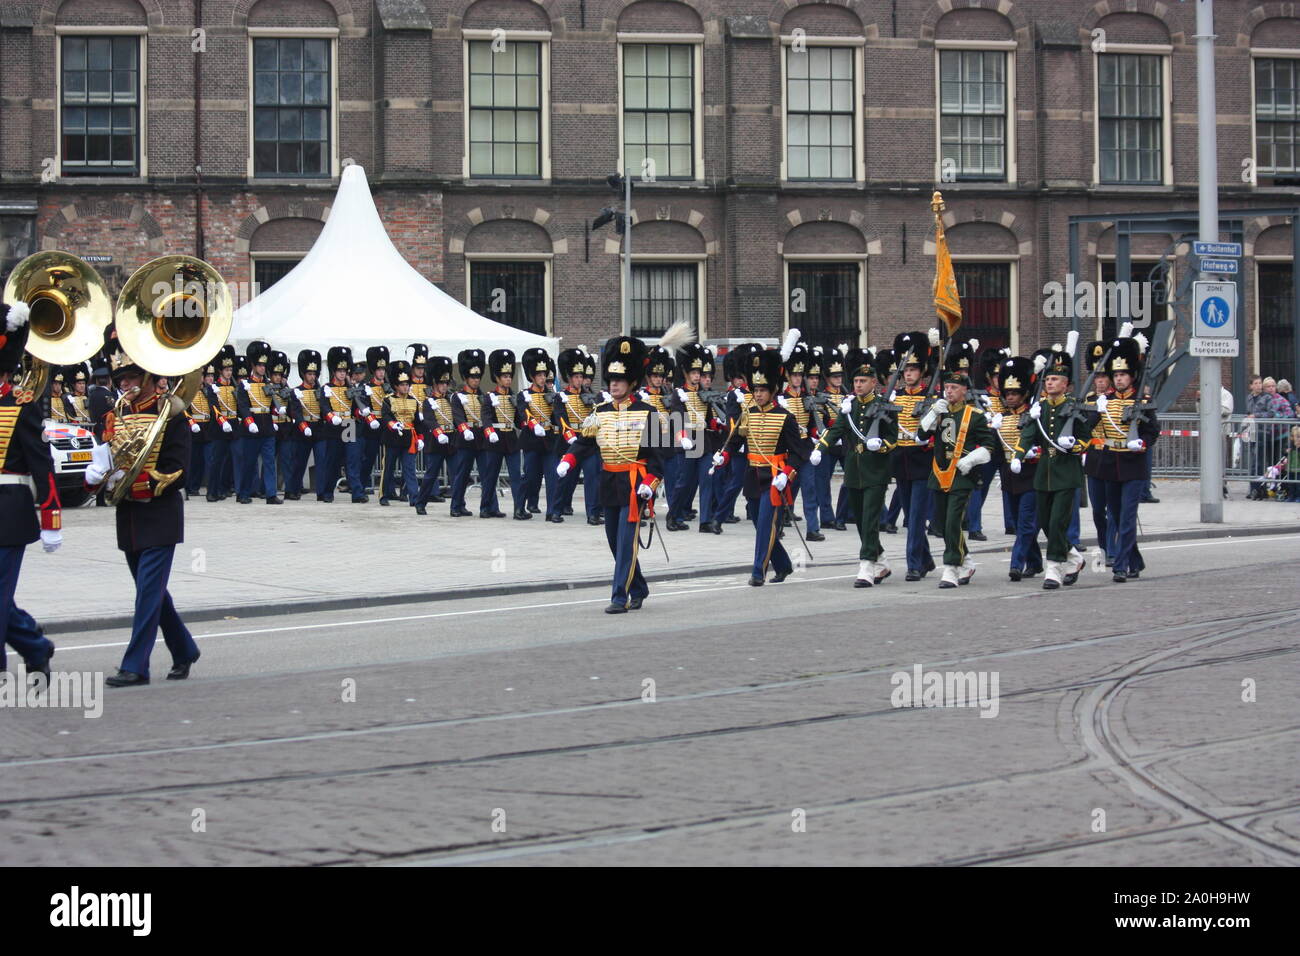 The Grenadiers and Rifles Guards Regiment of The Royal Netherland Monarch during Prinsjesdag procession in The Hague, South Holland, The Netherlands. Stock Photo